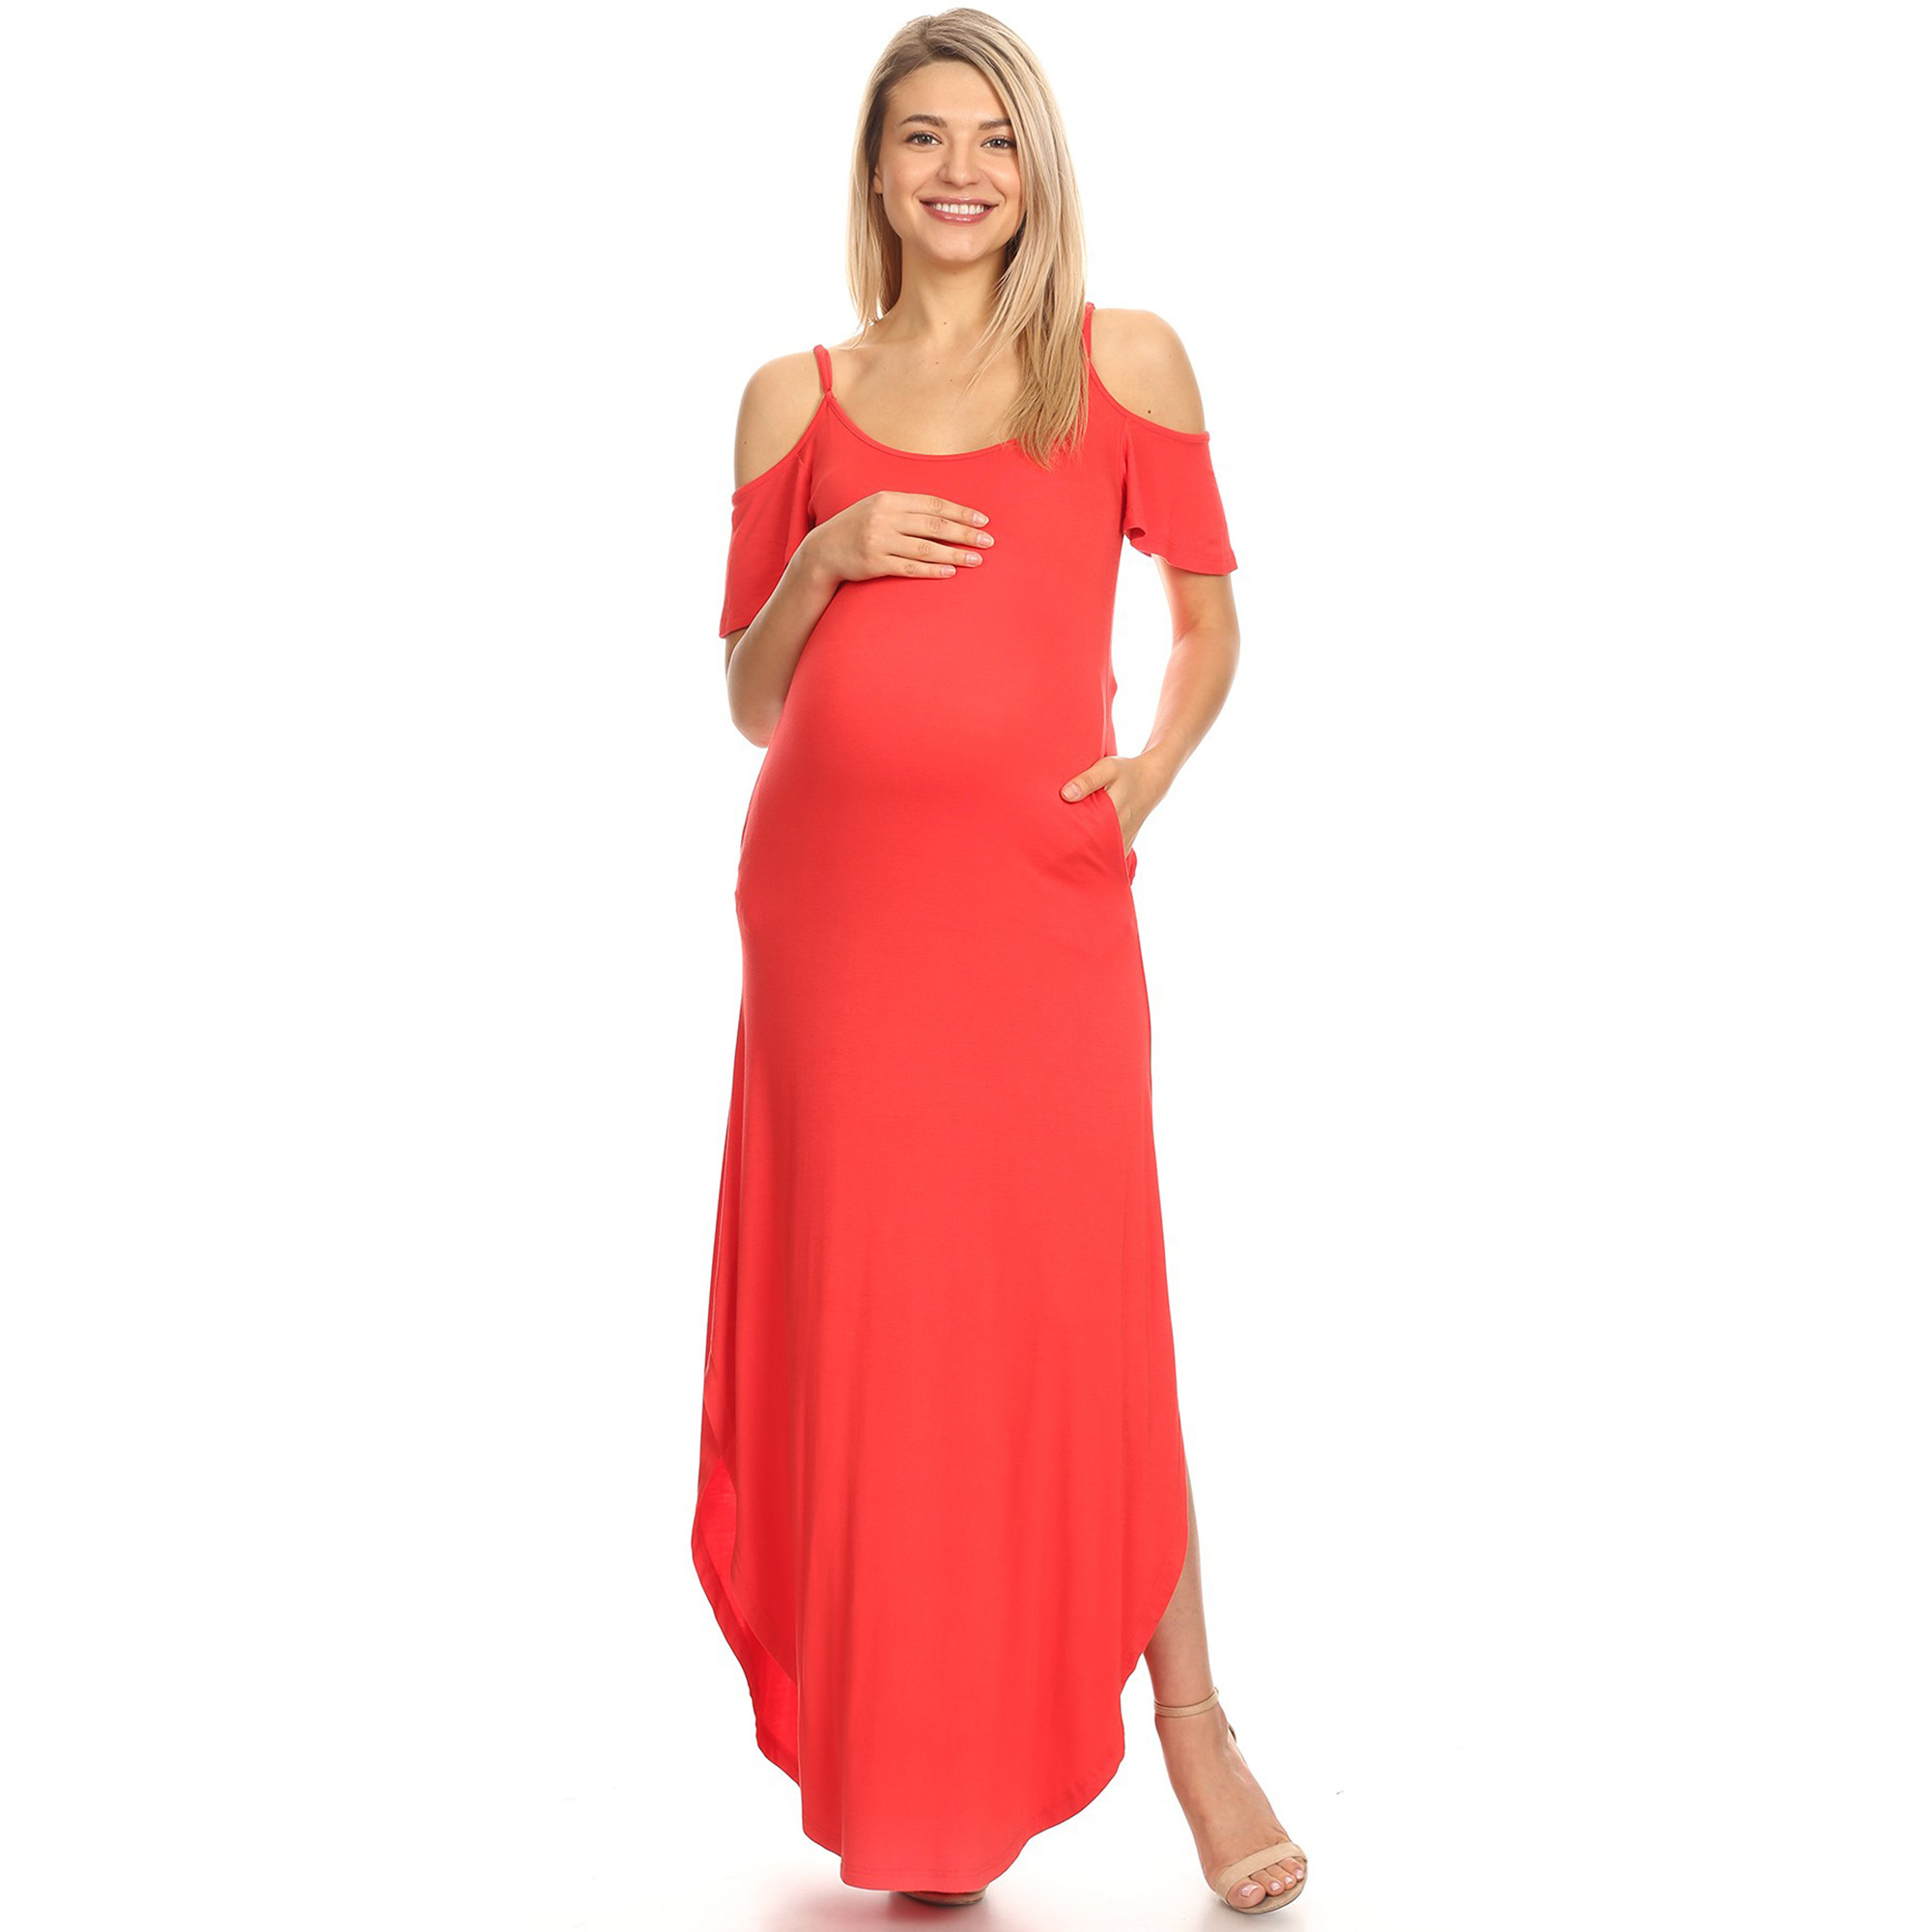 White Mark Women's Maternity Cold Shoulder Maxi Dress - Red, Large